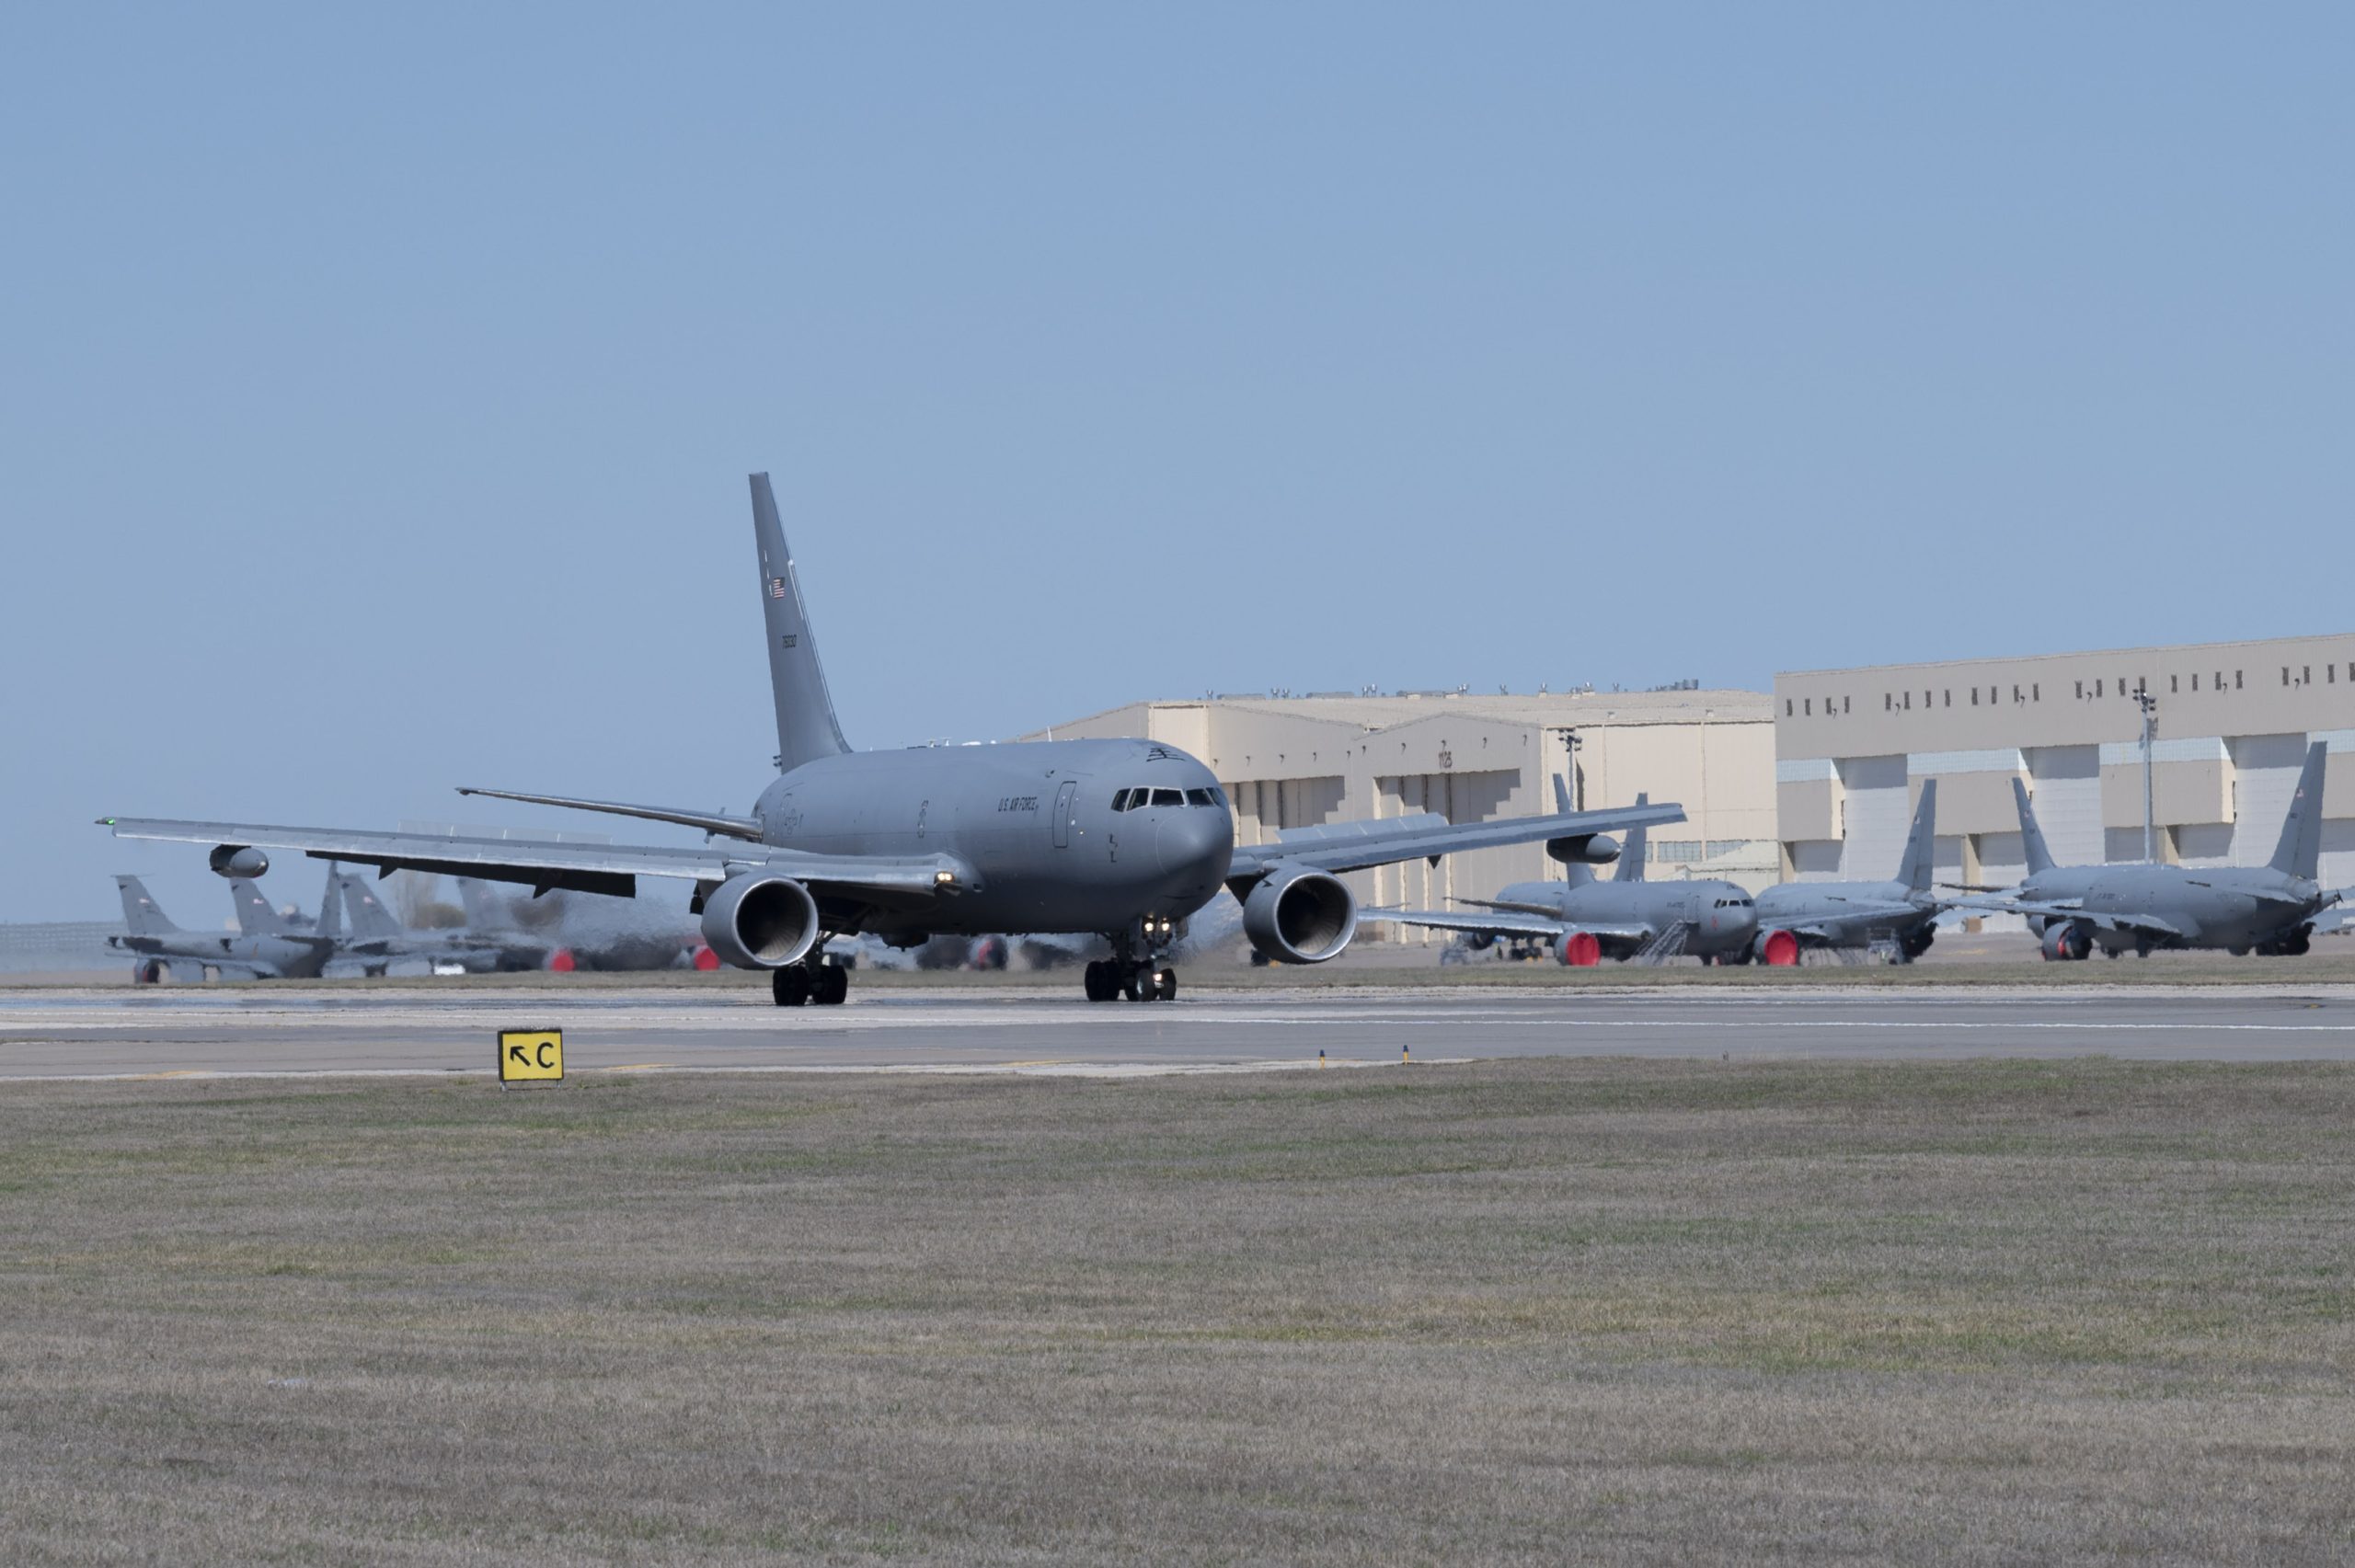 New KC-46 Wing Pods Being Tested to Enable Two Aircraft to Refuel at Once